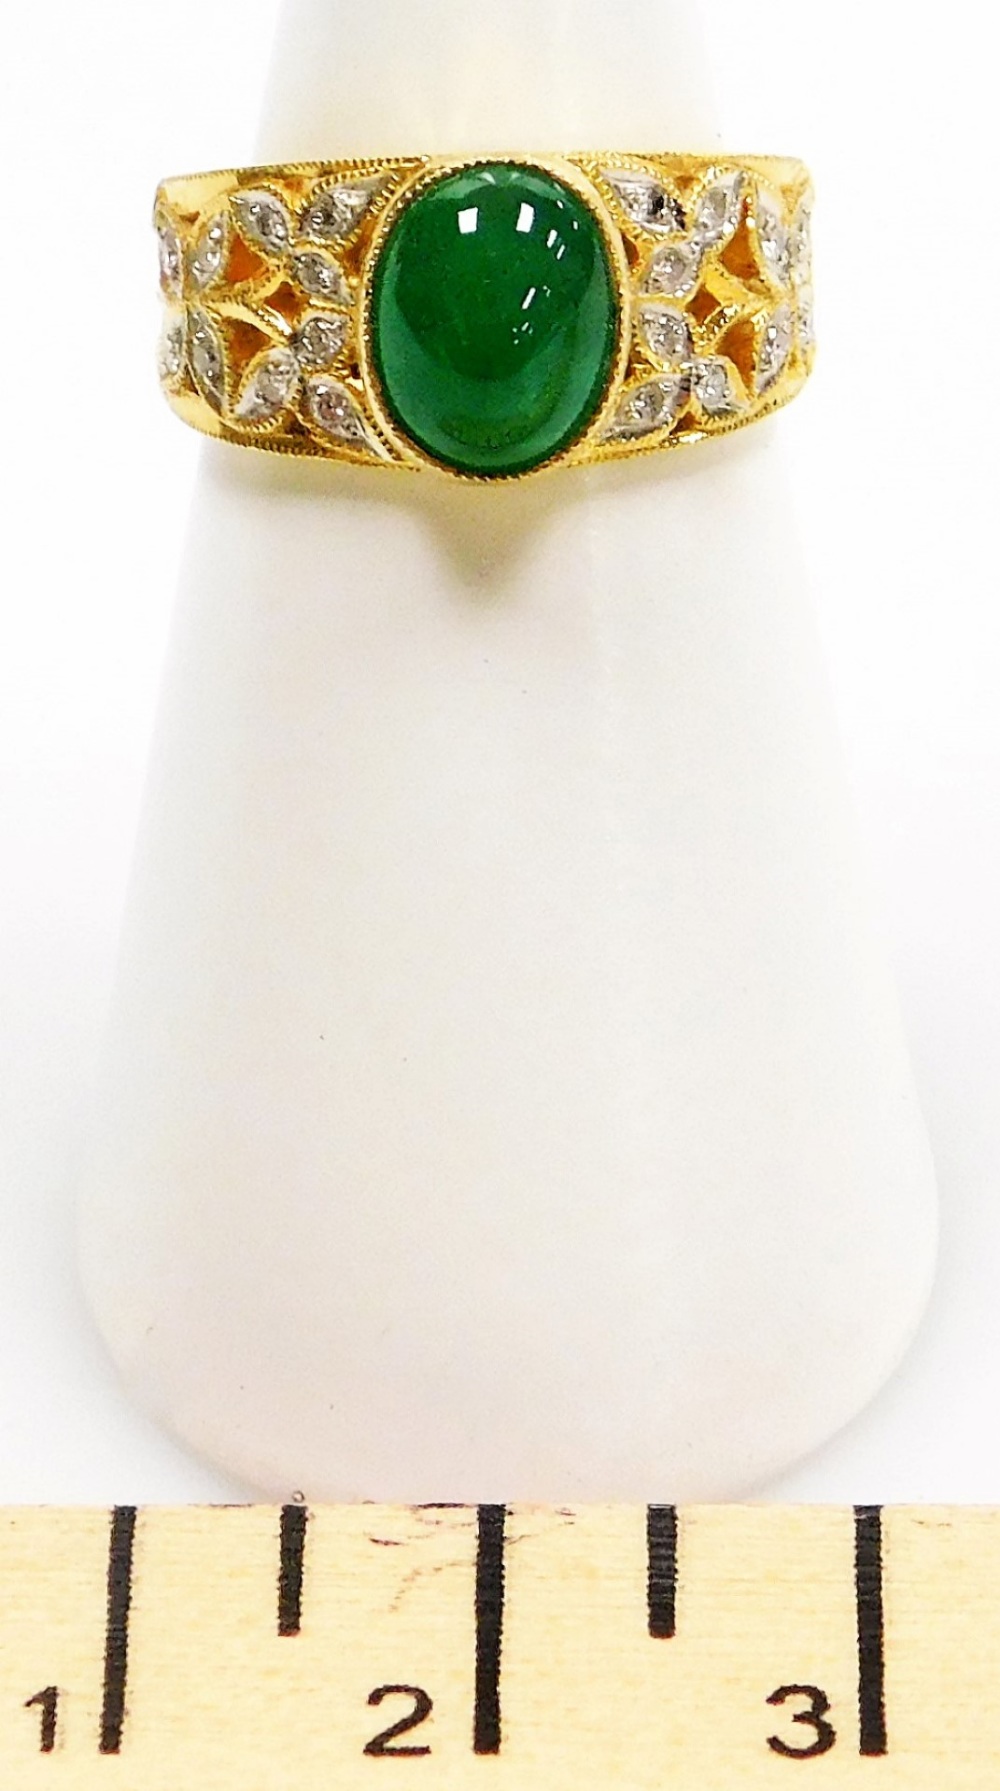 A green cabachon set ornate ring, tiny diamond set shoulders, size J, set in precious yellow metal, - Image 2 of 2